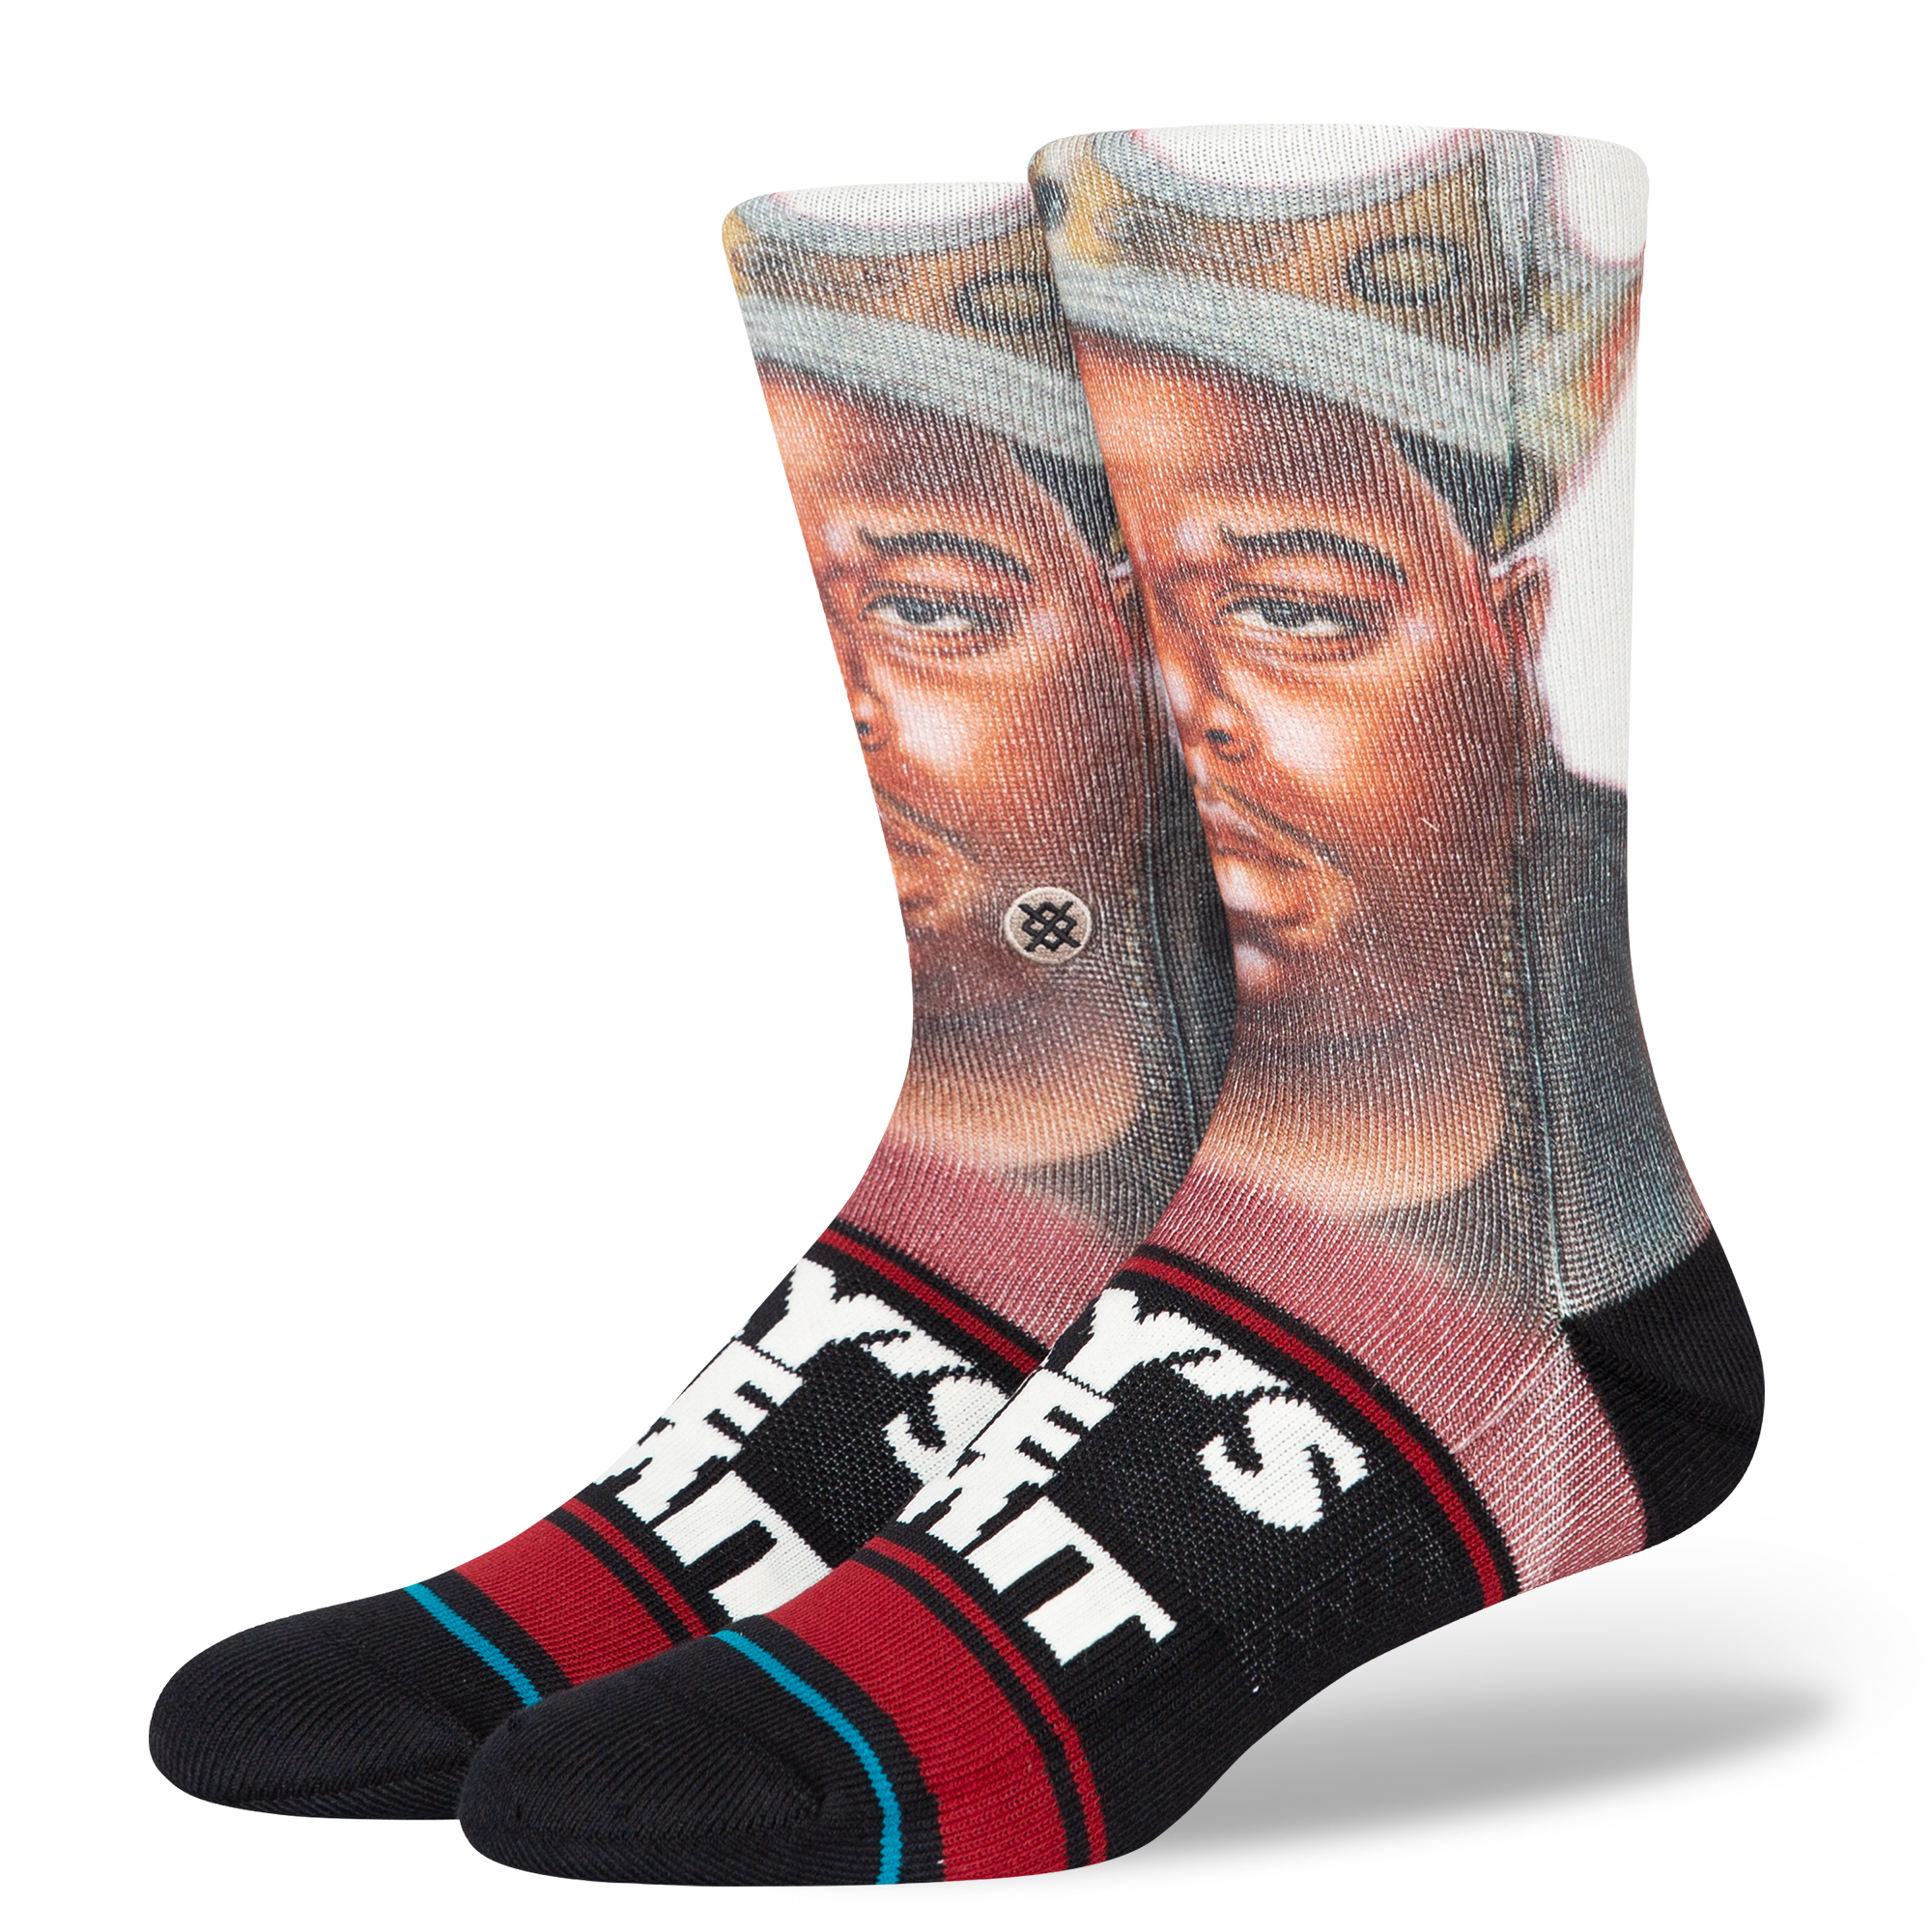 Notorious B.I.G. X Stance Limit Crew Poly Socks | The Skys Stance